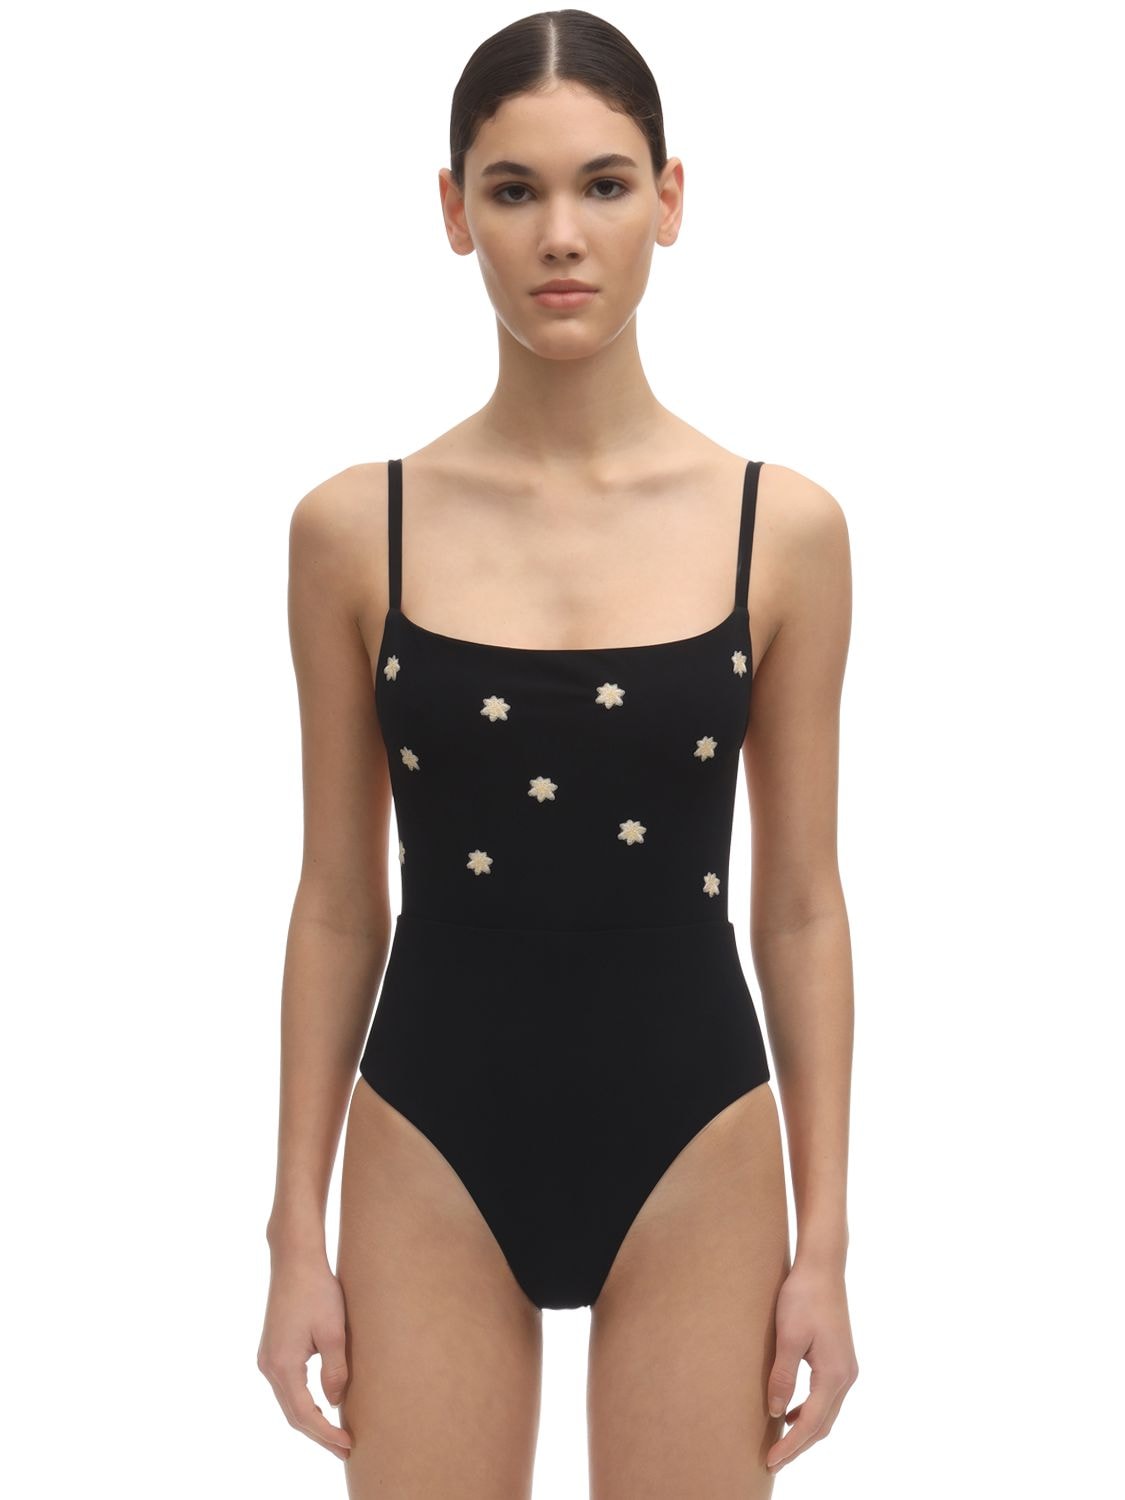 ANEMONE EMBROIDERED ONE PIECE SWIMSUIT,71ICEA001-QKXBQ0S1